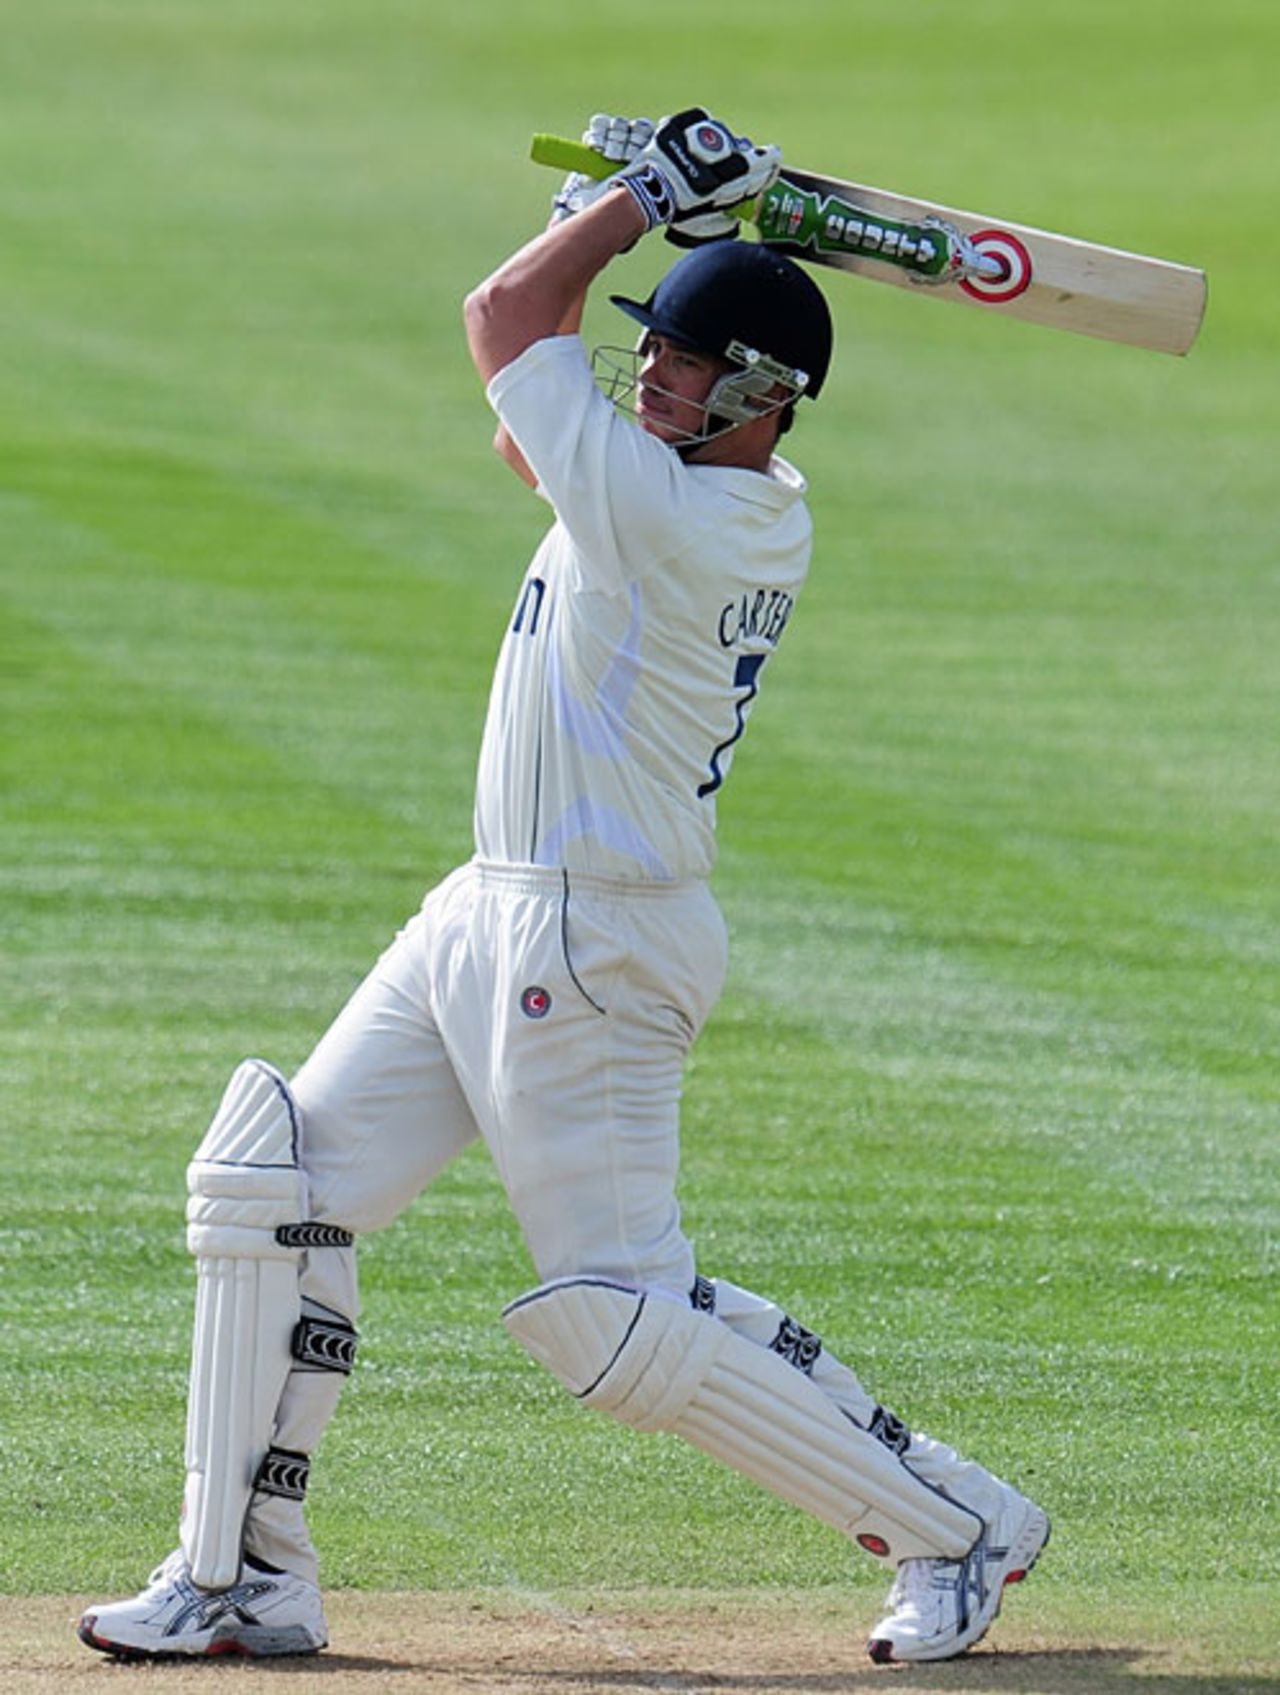 Neil Carter completed an excellent all-round game by thumping 24 from 20 balls to hurry his side to victory, Warwickshire v Hampshire, County Championship, Division One, Edgbaston, April 30, 2010